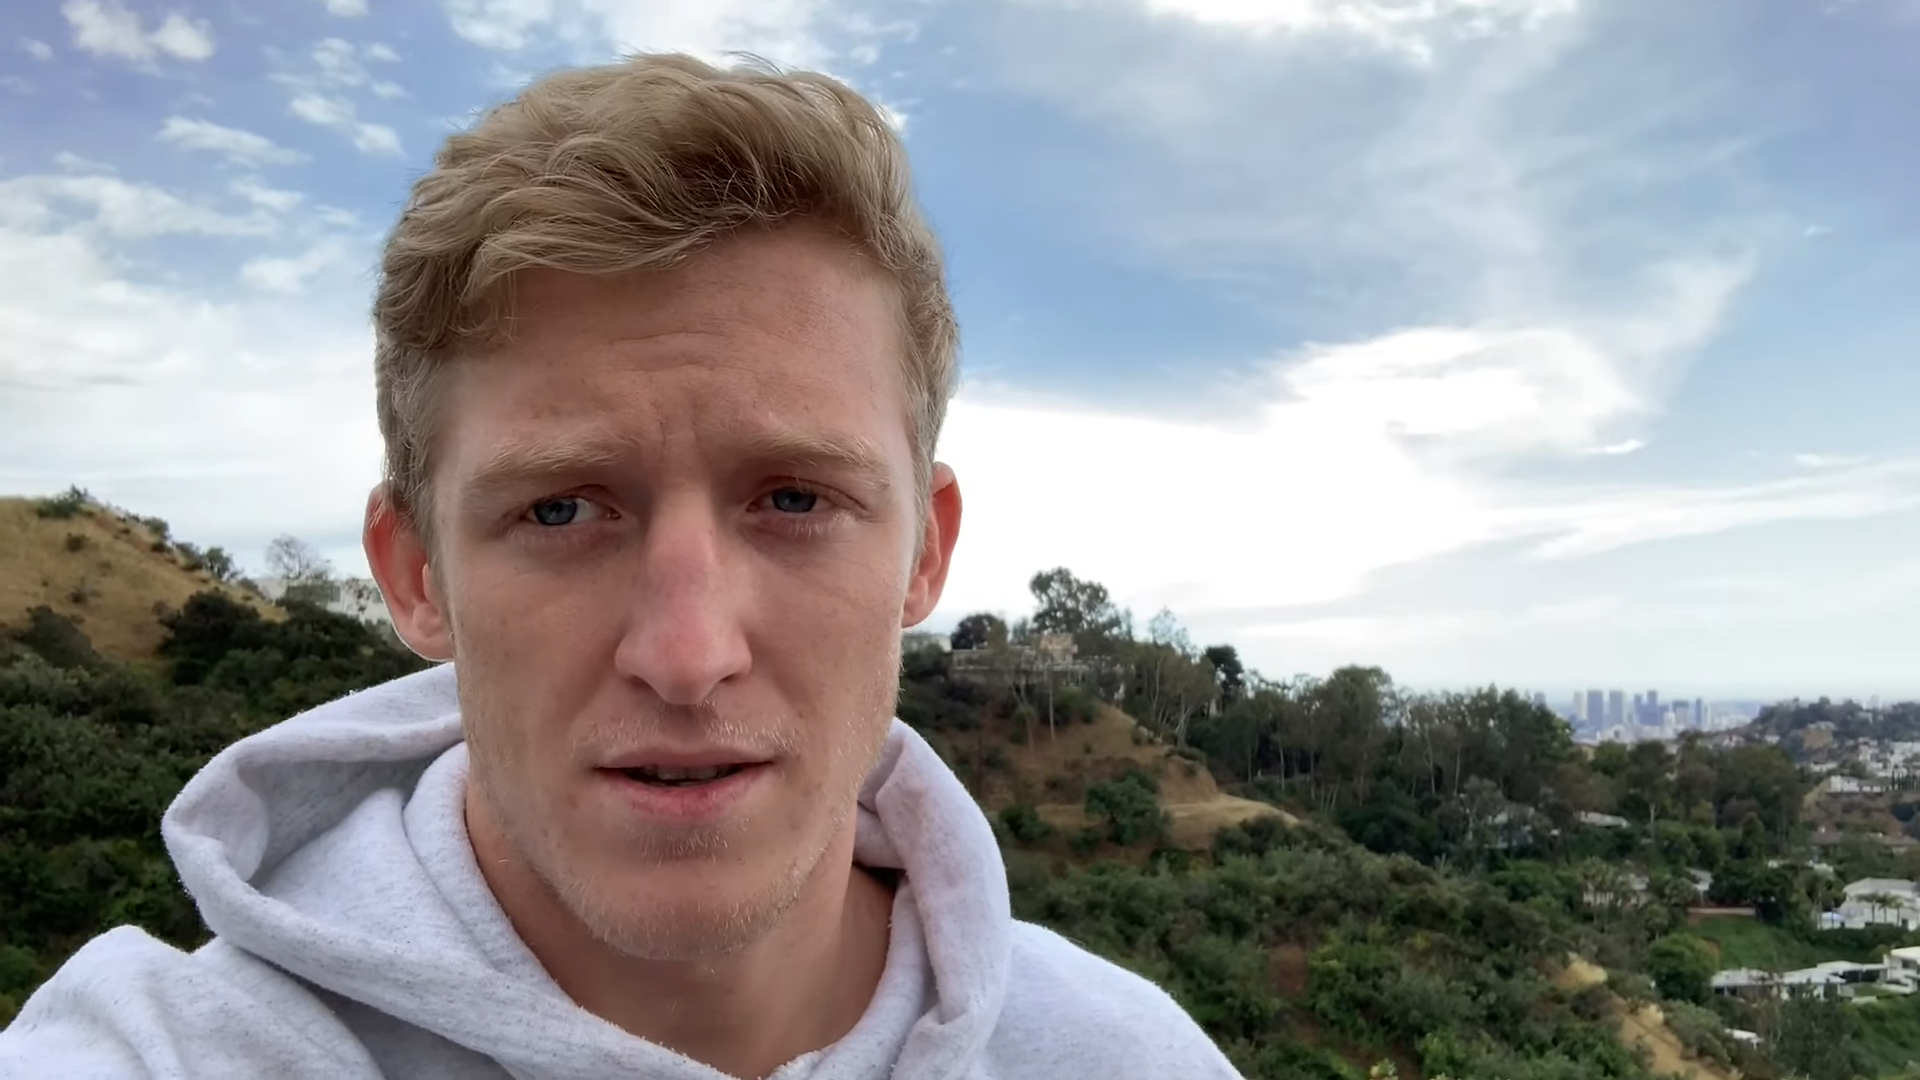 FaZe Clan Is Suing Tfue For Breach of Contract